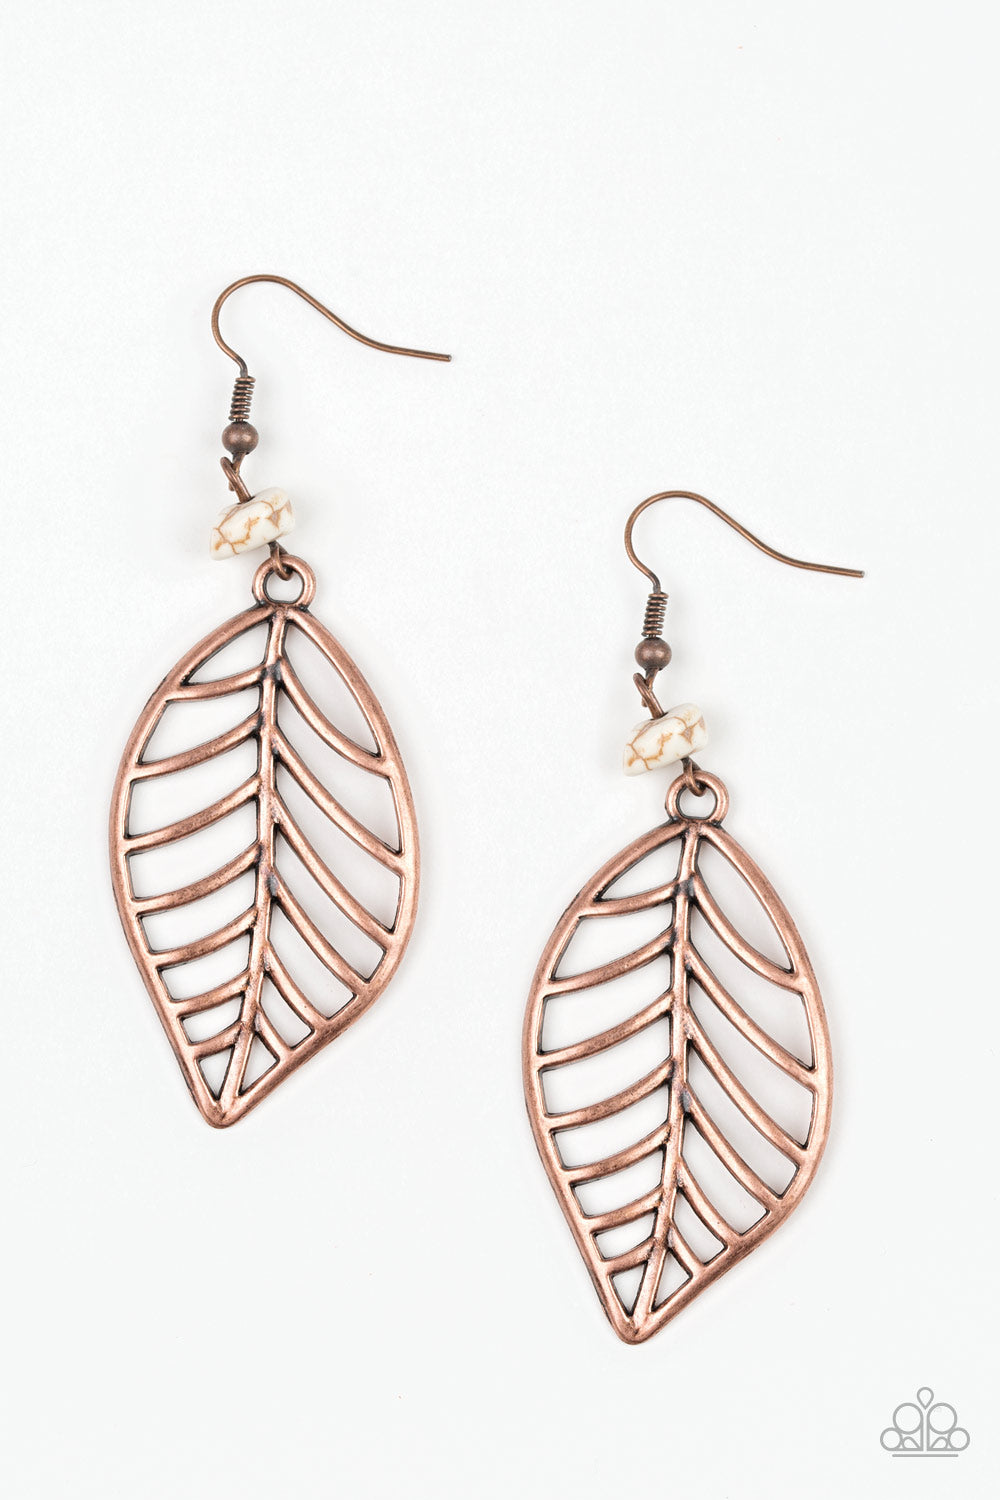 BOUGH Out Copper Paparazzi Earrings Cashmere Pink Jewels - Cashmere Pink Jewels & Accessories, Cashmere Pink Jewels & Accessories - Paparazzi